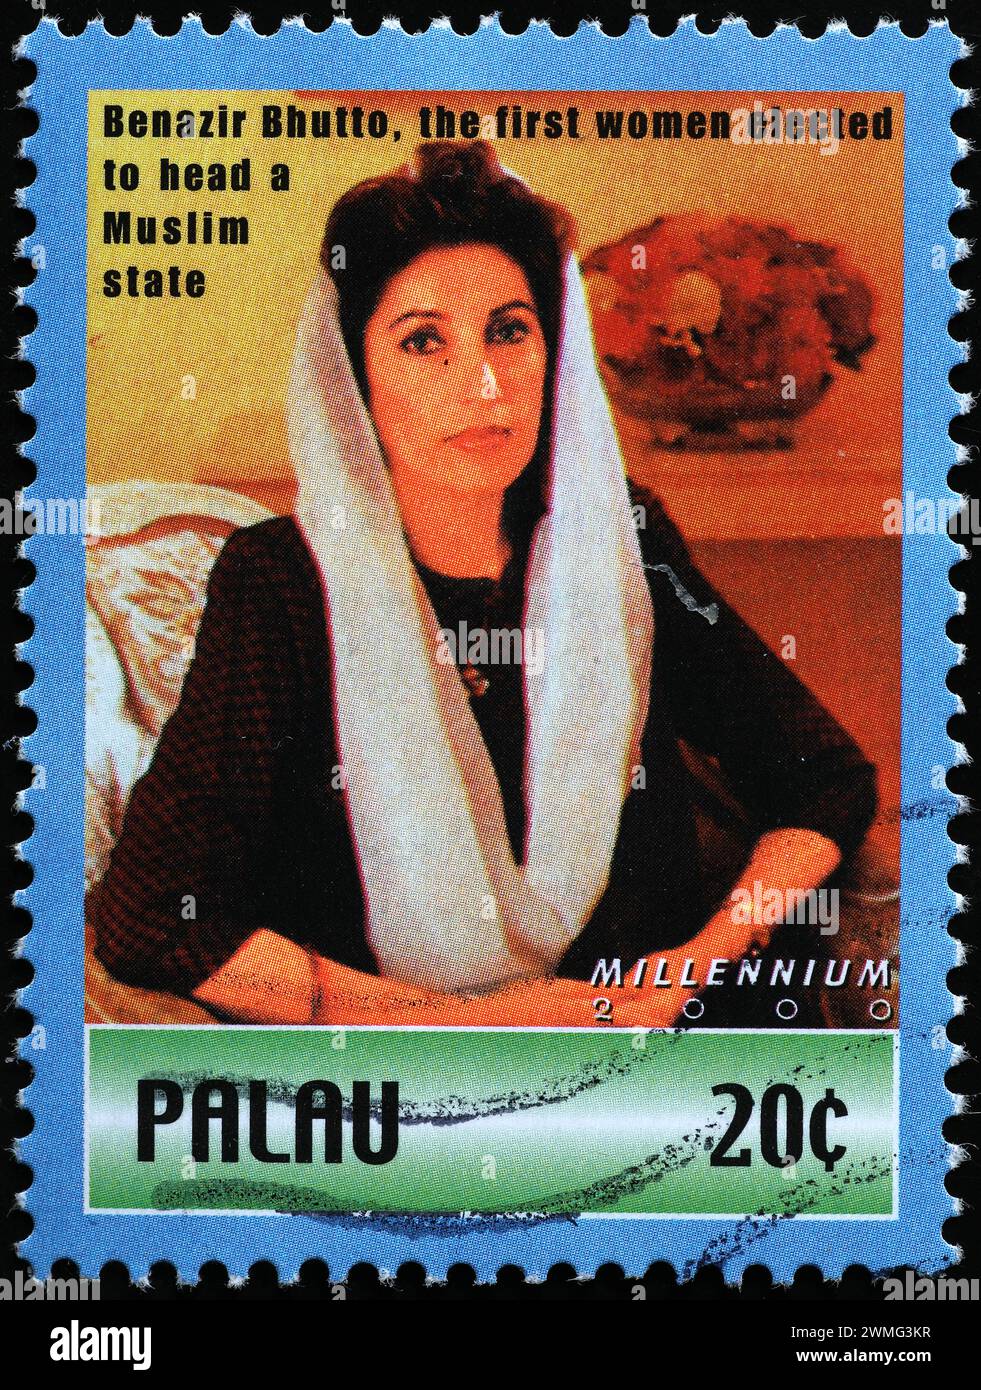 Benazir Bhutto, first woman elected to head a muslim nation on stamp Stock Photo